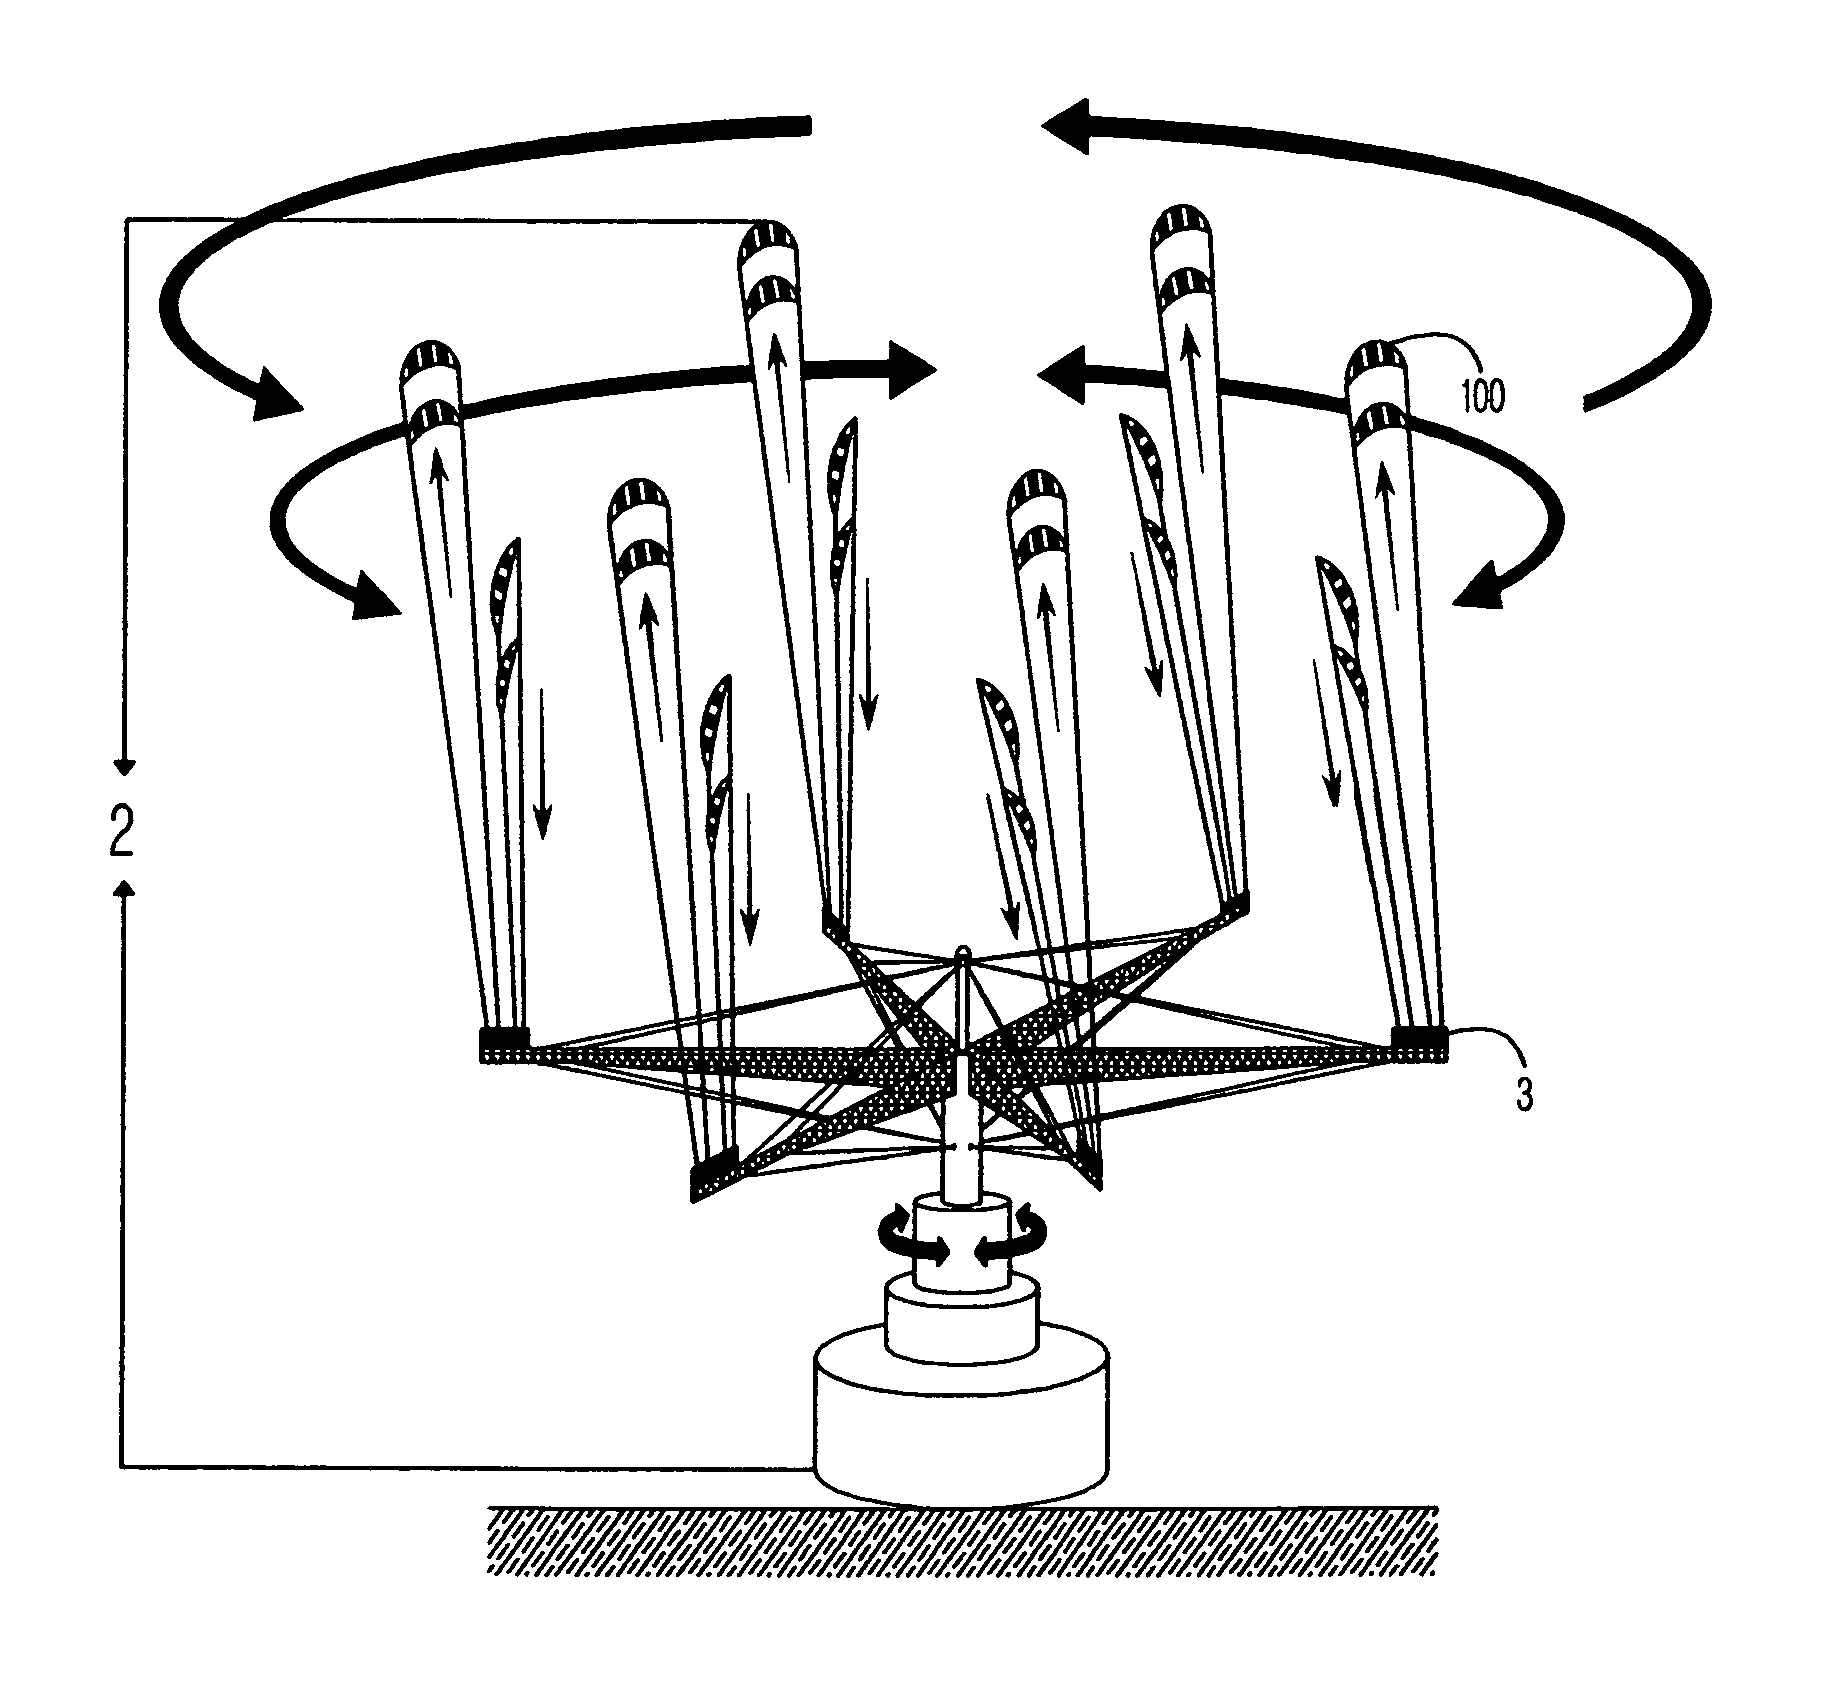 Medium/Large Electricity Generator Equipped with Automatically Winding and Un-winding Kite Cable Mechanism for minimum energy loss